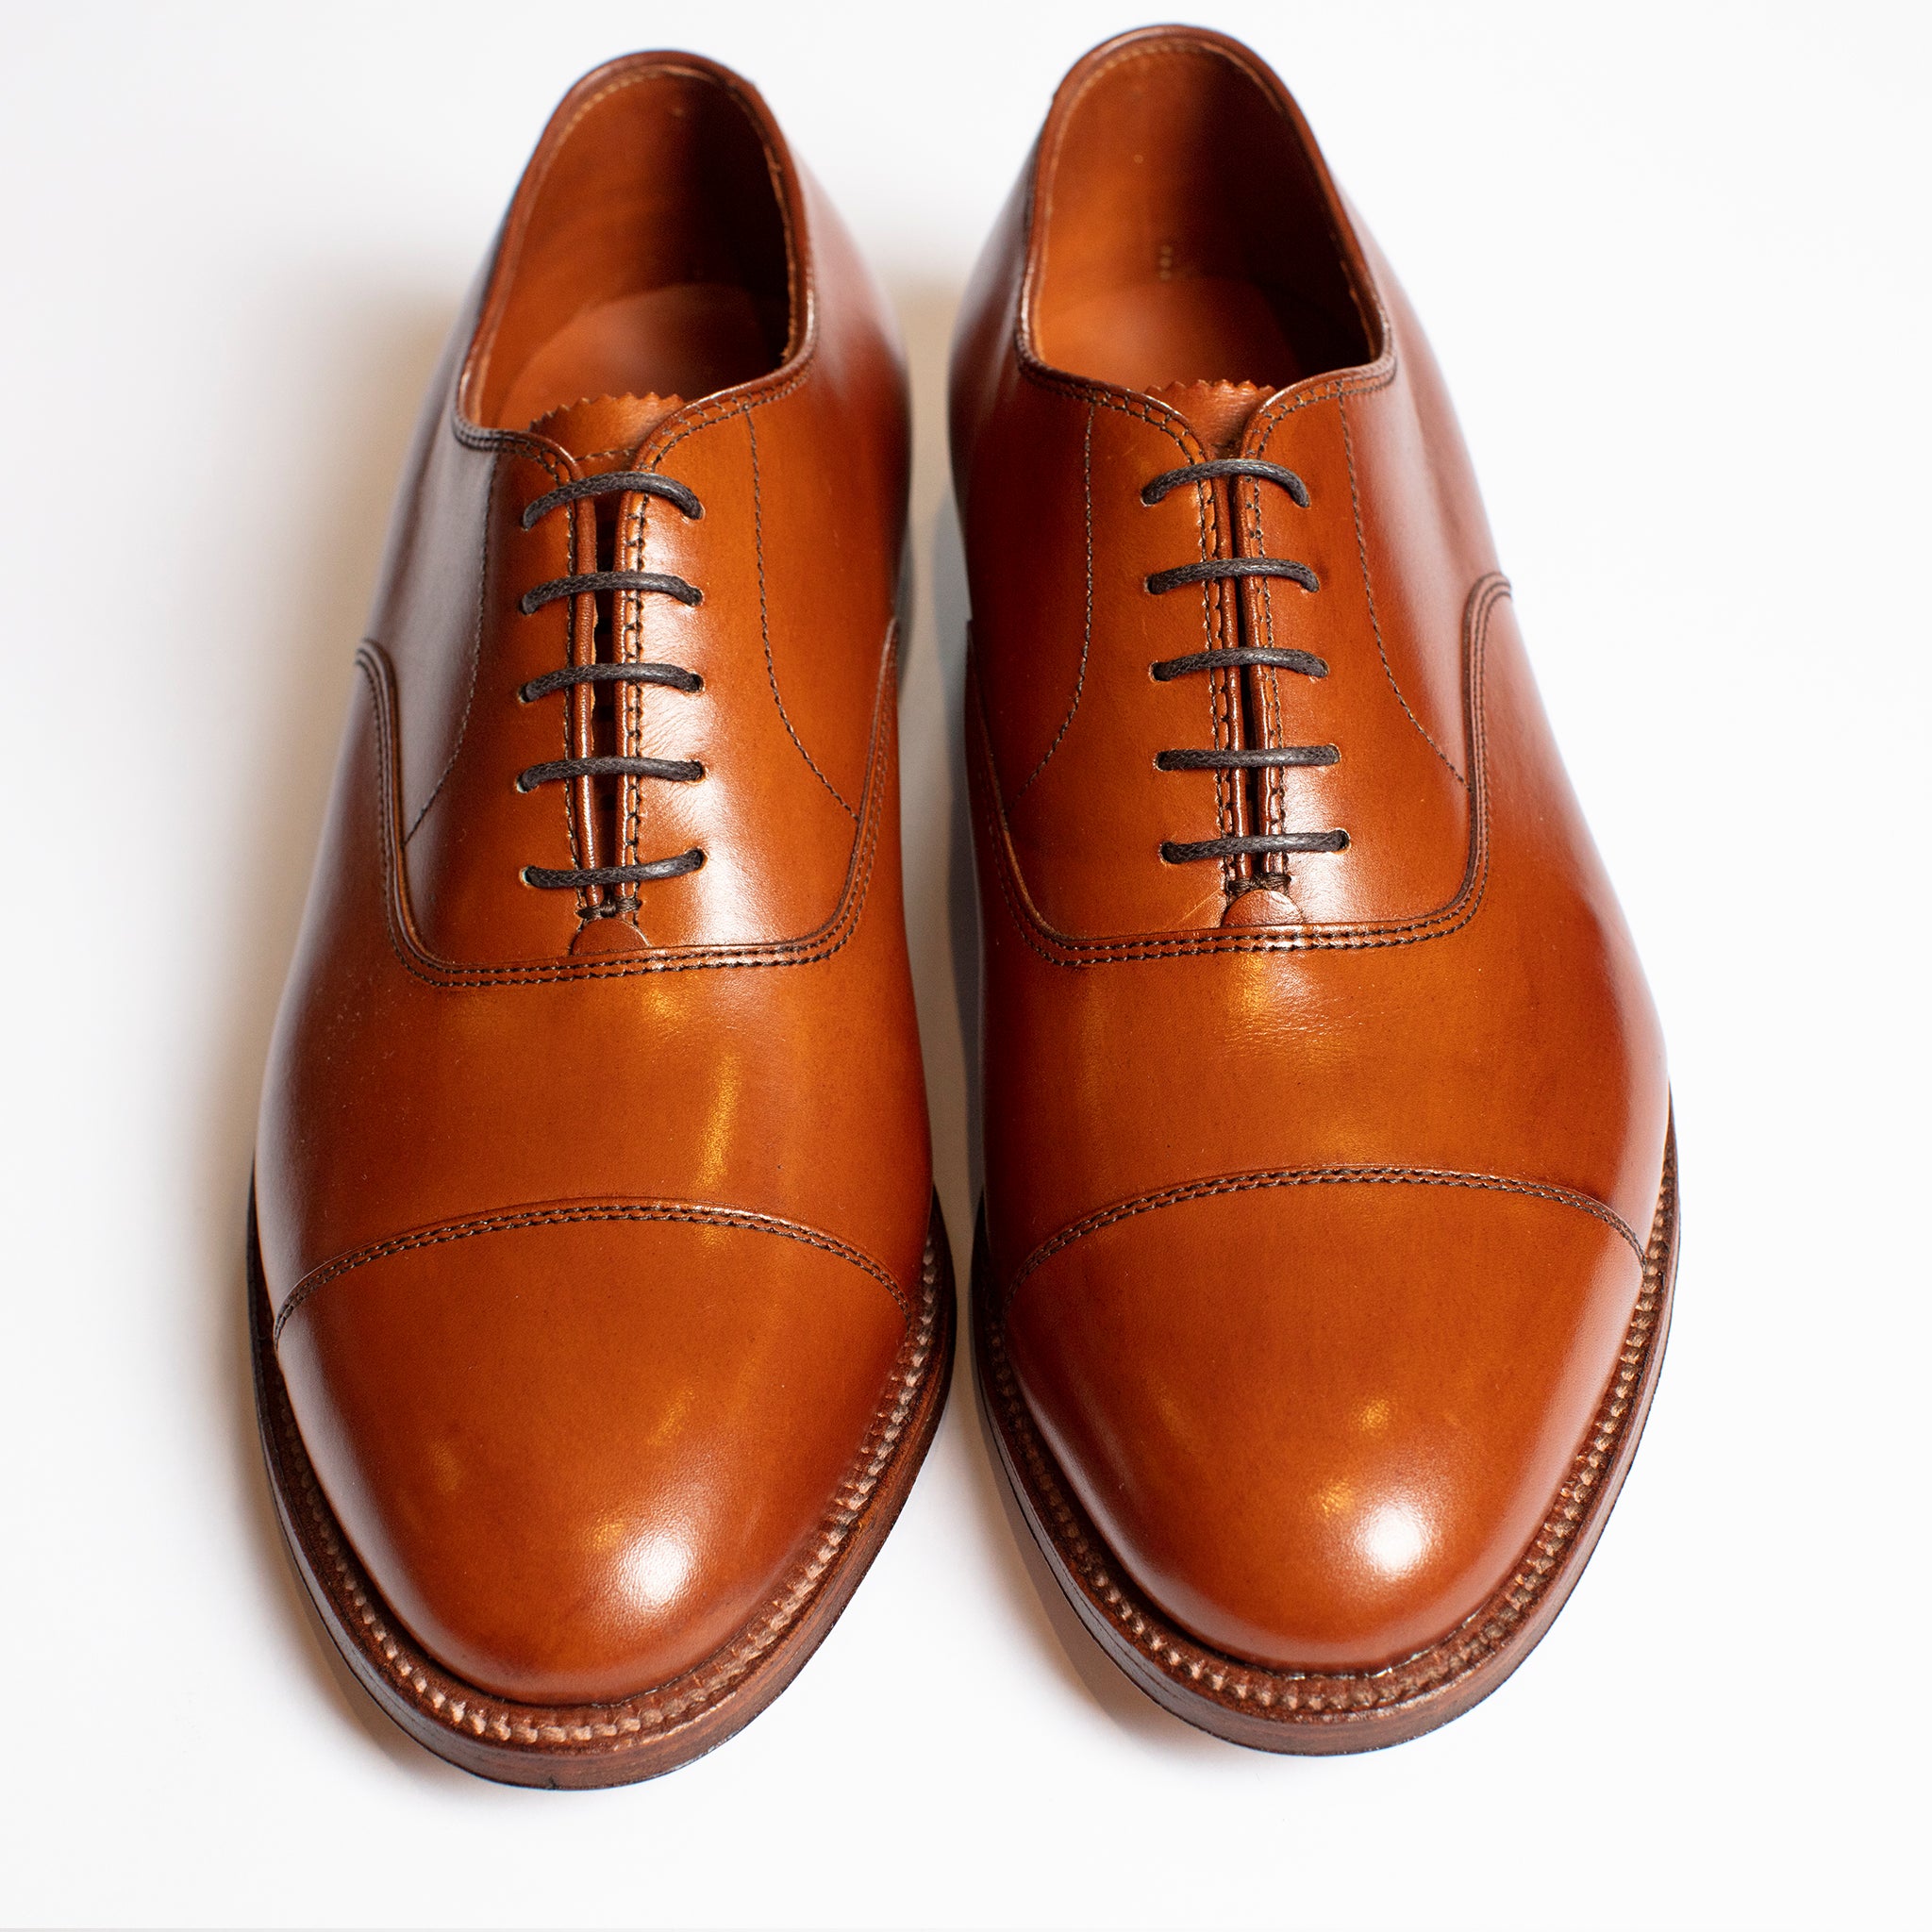 Alden Plain Cap-Toe Oxford in Burnished Tan – Oxford and Derby